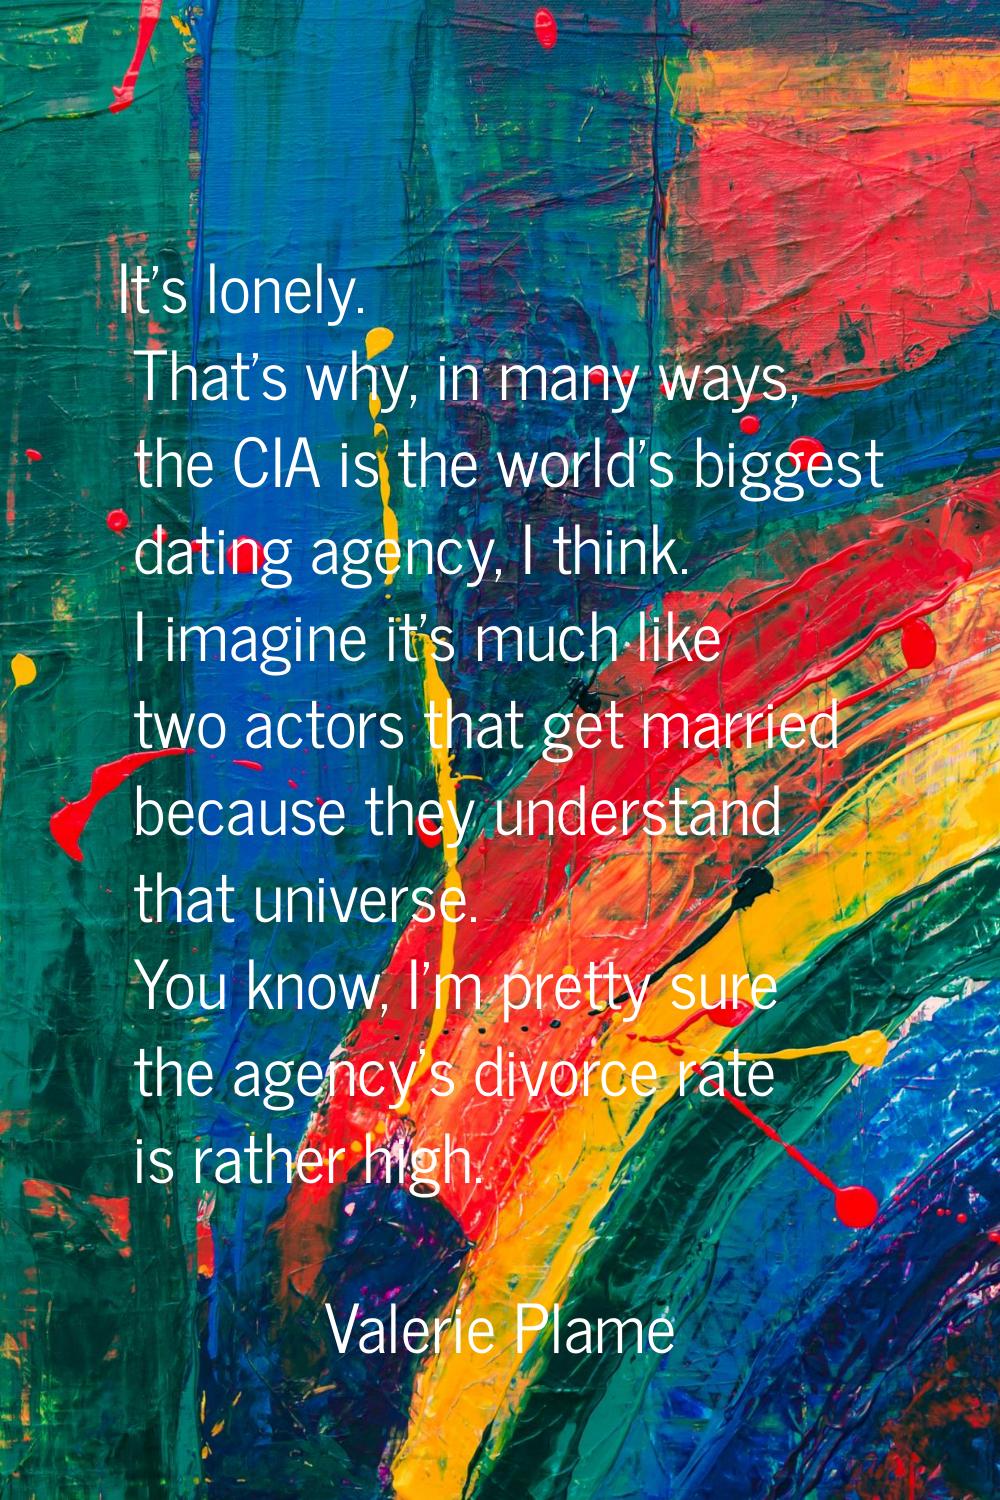 It's lonely. That's why, in many ways, the CIA is the world's biggest dating agency, I think. I ima